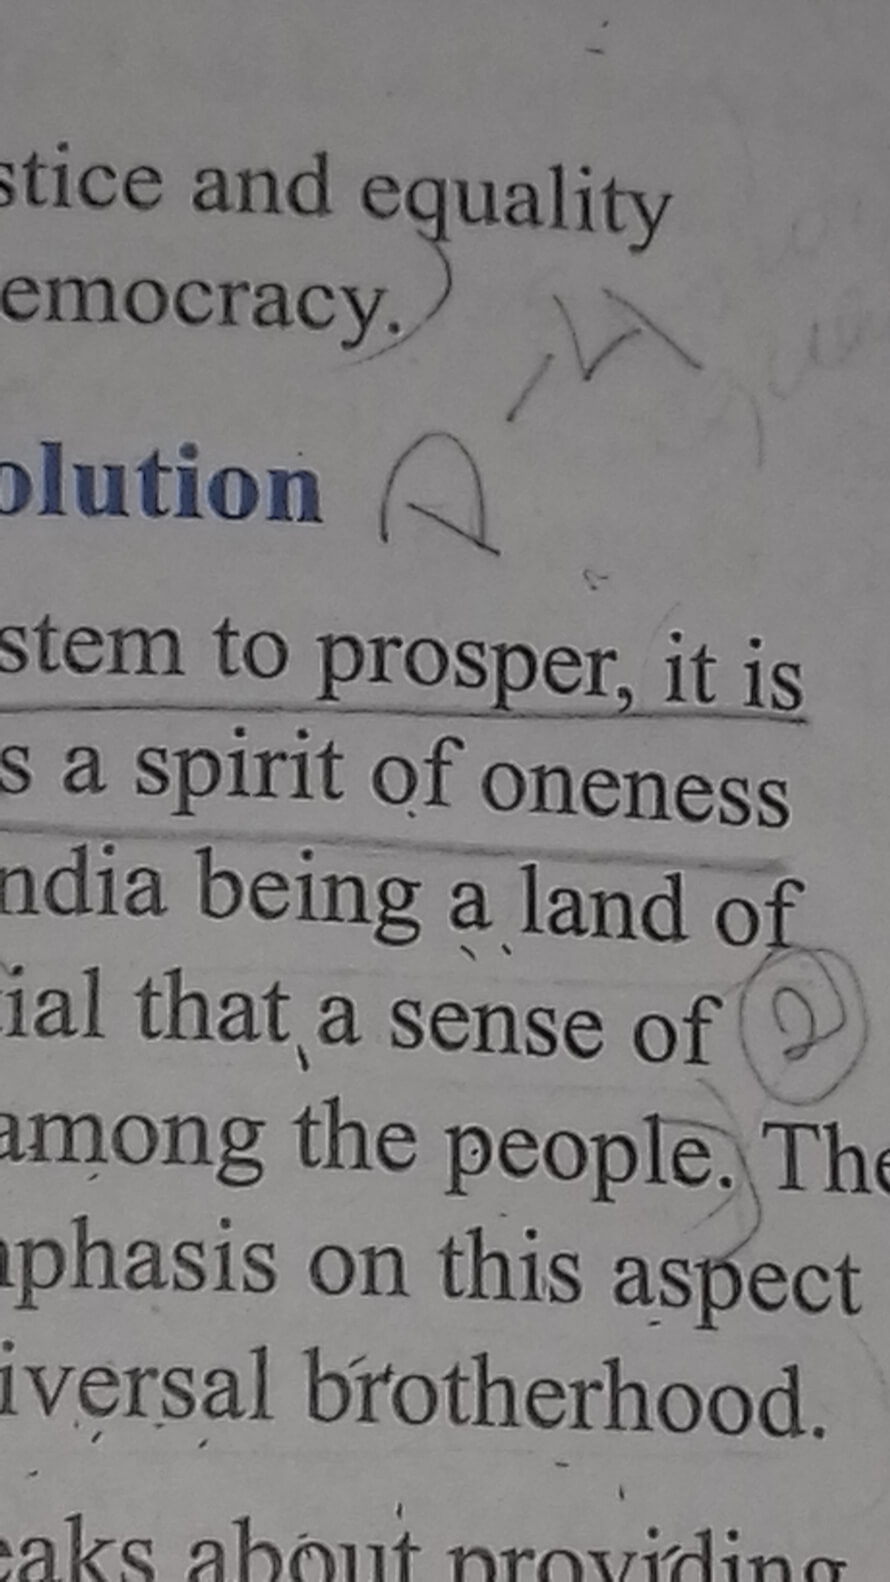   reason  19928282828181882 why i prefer civics over history and geography  